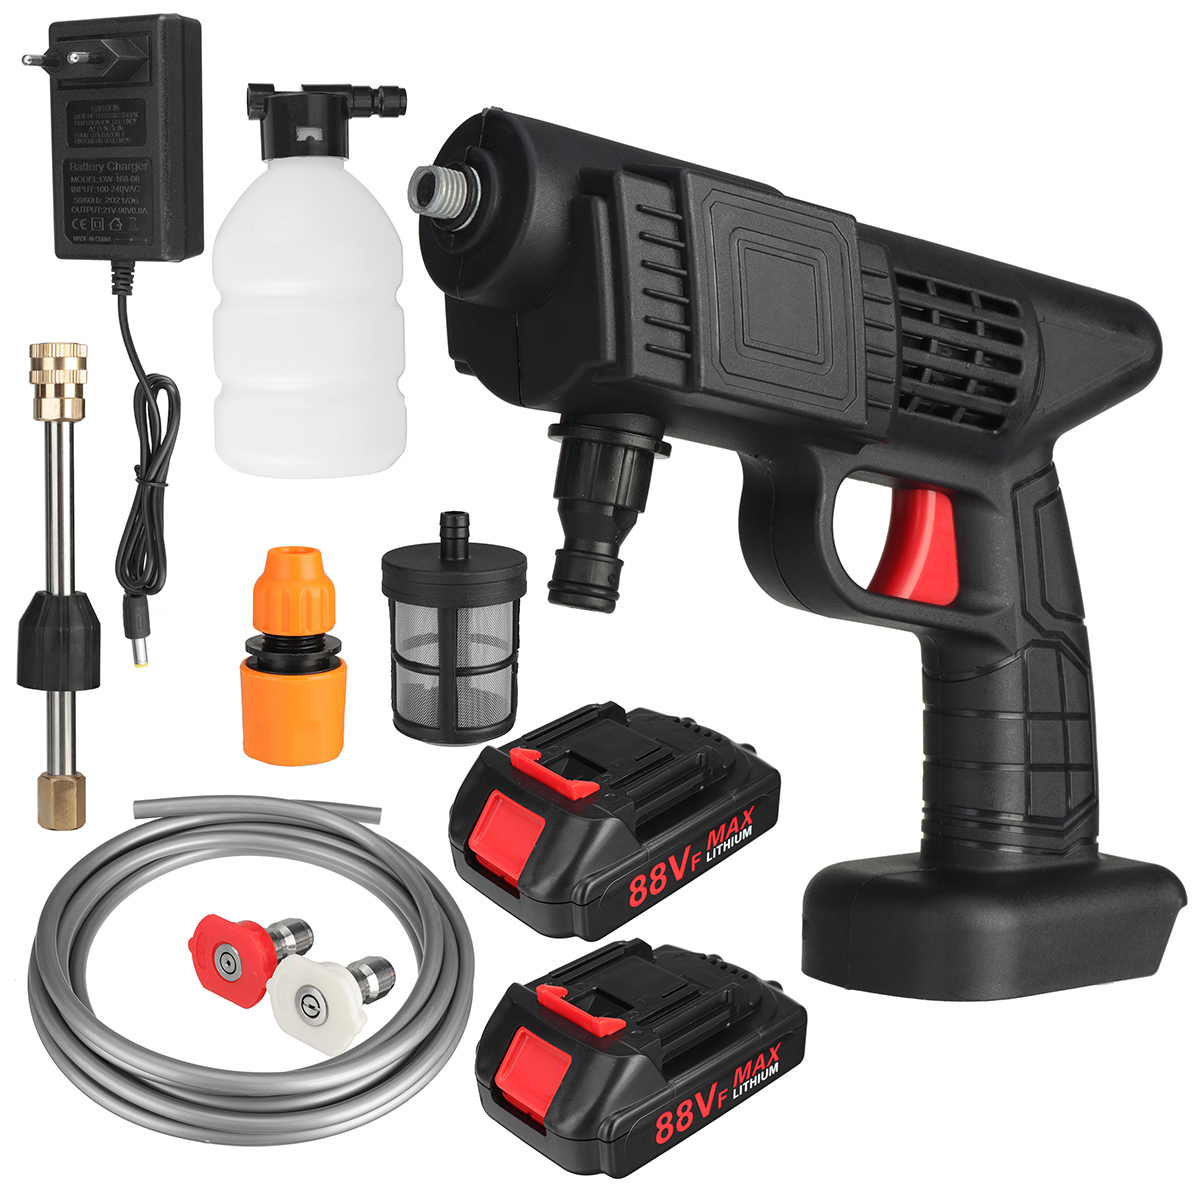 88VF-High-Pressure-Cordless-Washer-Spray-Guns-Water-Guns-Cleaner-With-None-1pc-2Pcs-88VF-Battery-1873694-10